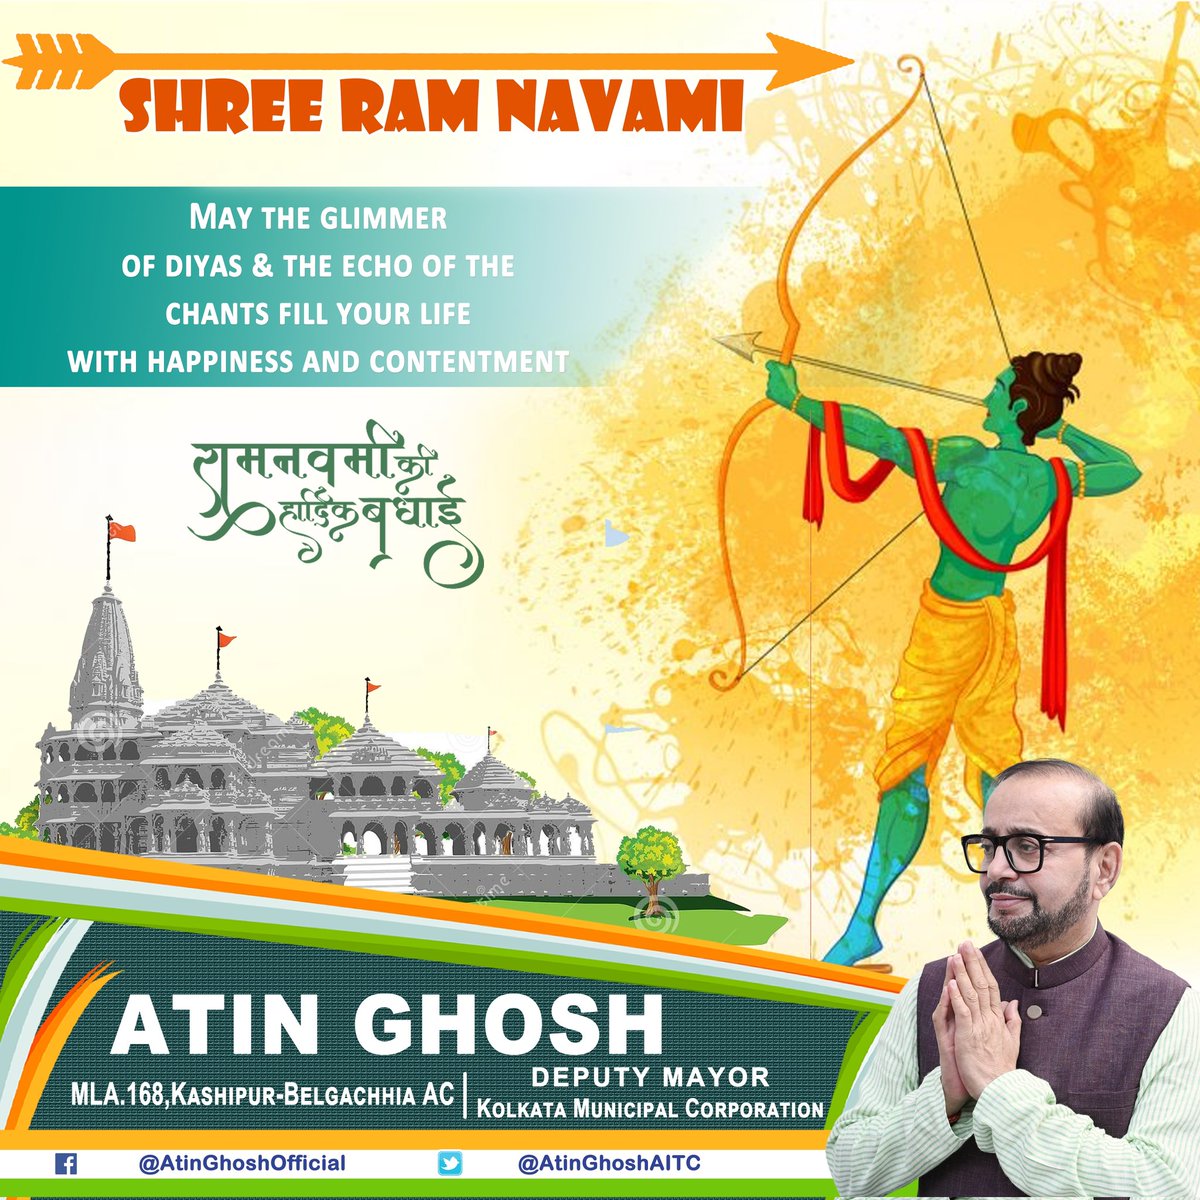 रामनवमी की हार्दिक शुभकामनायें... Greetings to all on the auspicious occasion of Shree Ram Navami. May the glimmer of Diyas & The Echo of the chants fill your life with happiness and contentment. #रामनवमी #RamNavami #RamNavami2024 #ShreeRamNavami #HappyRamNavami #AtinGhosh